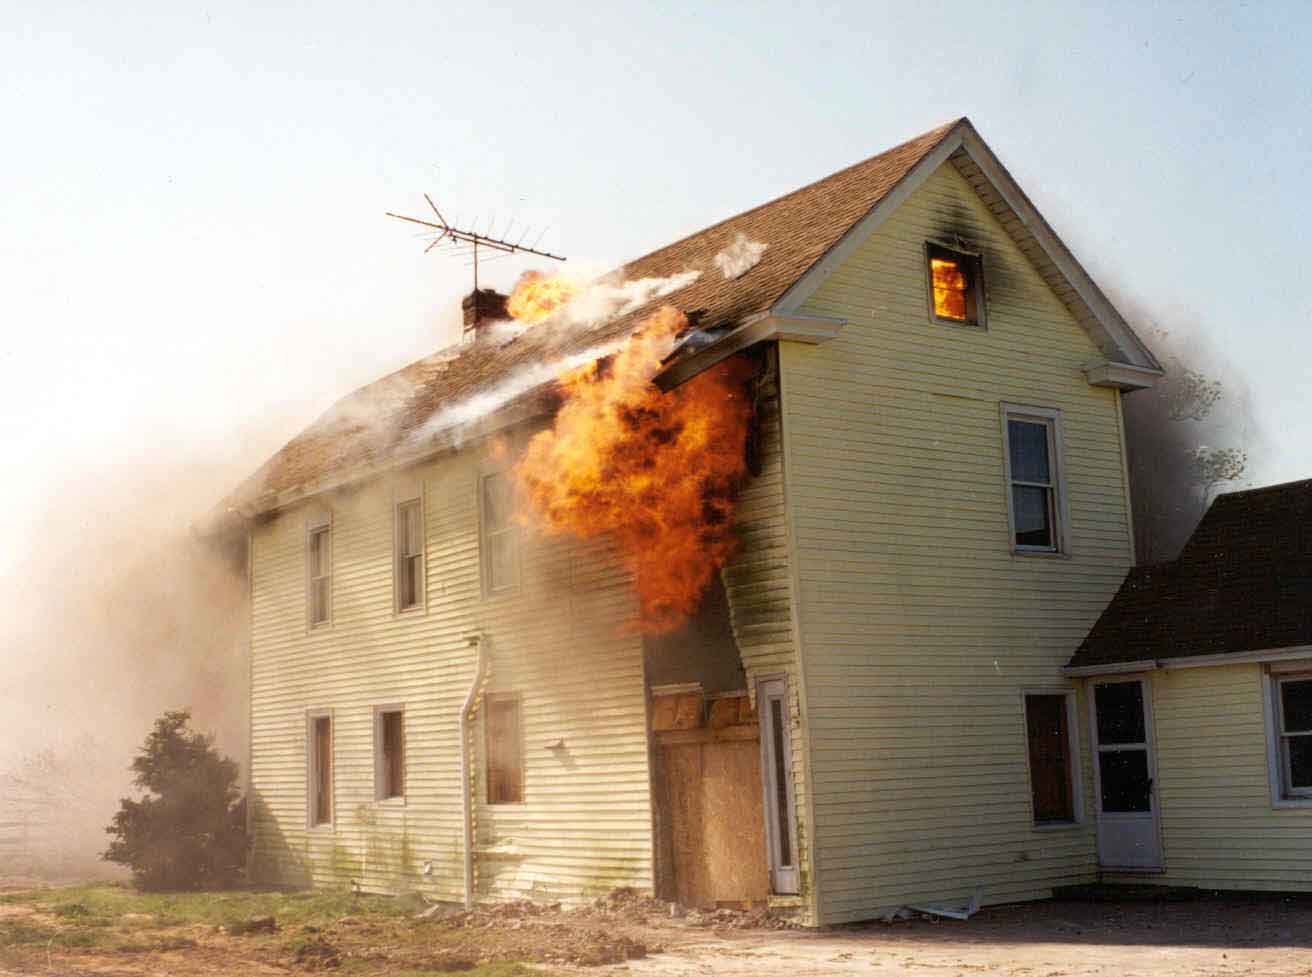 Front Page Photo: Photograph of the burning structure.